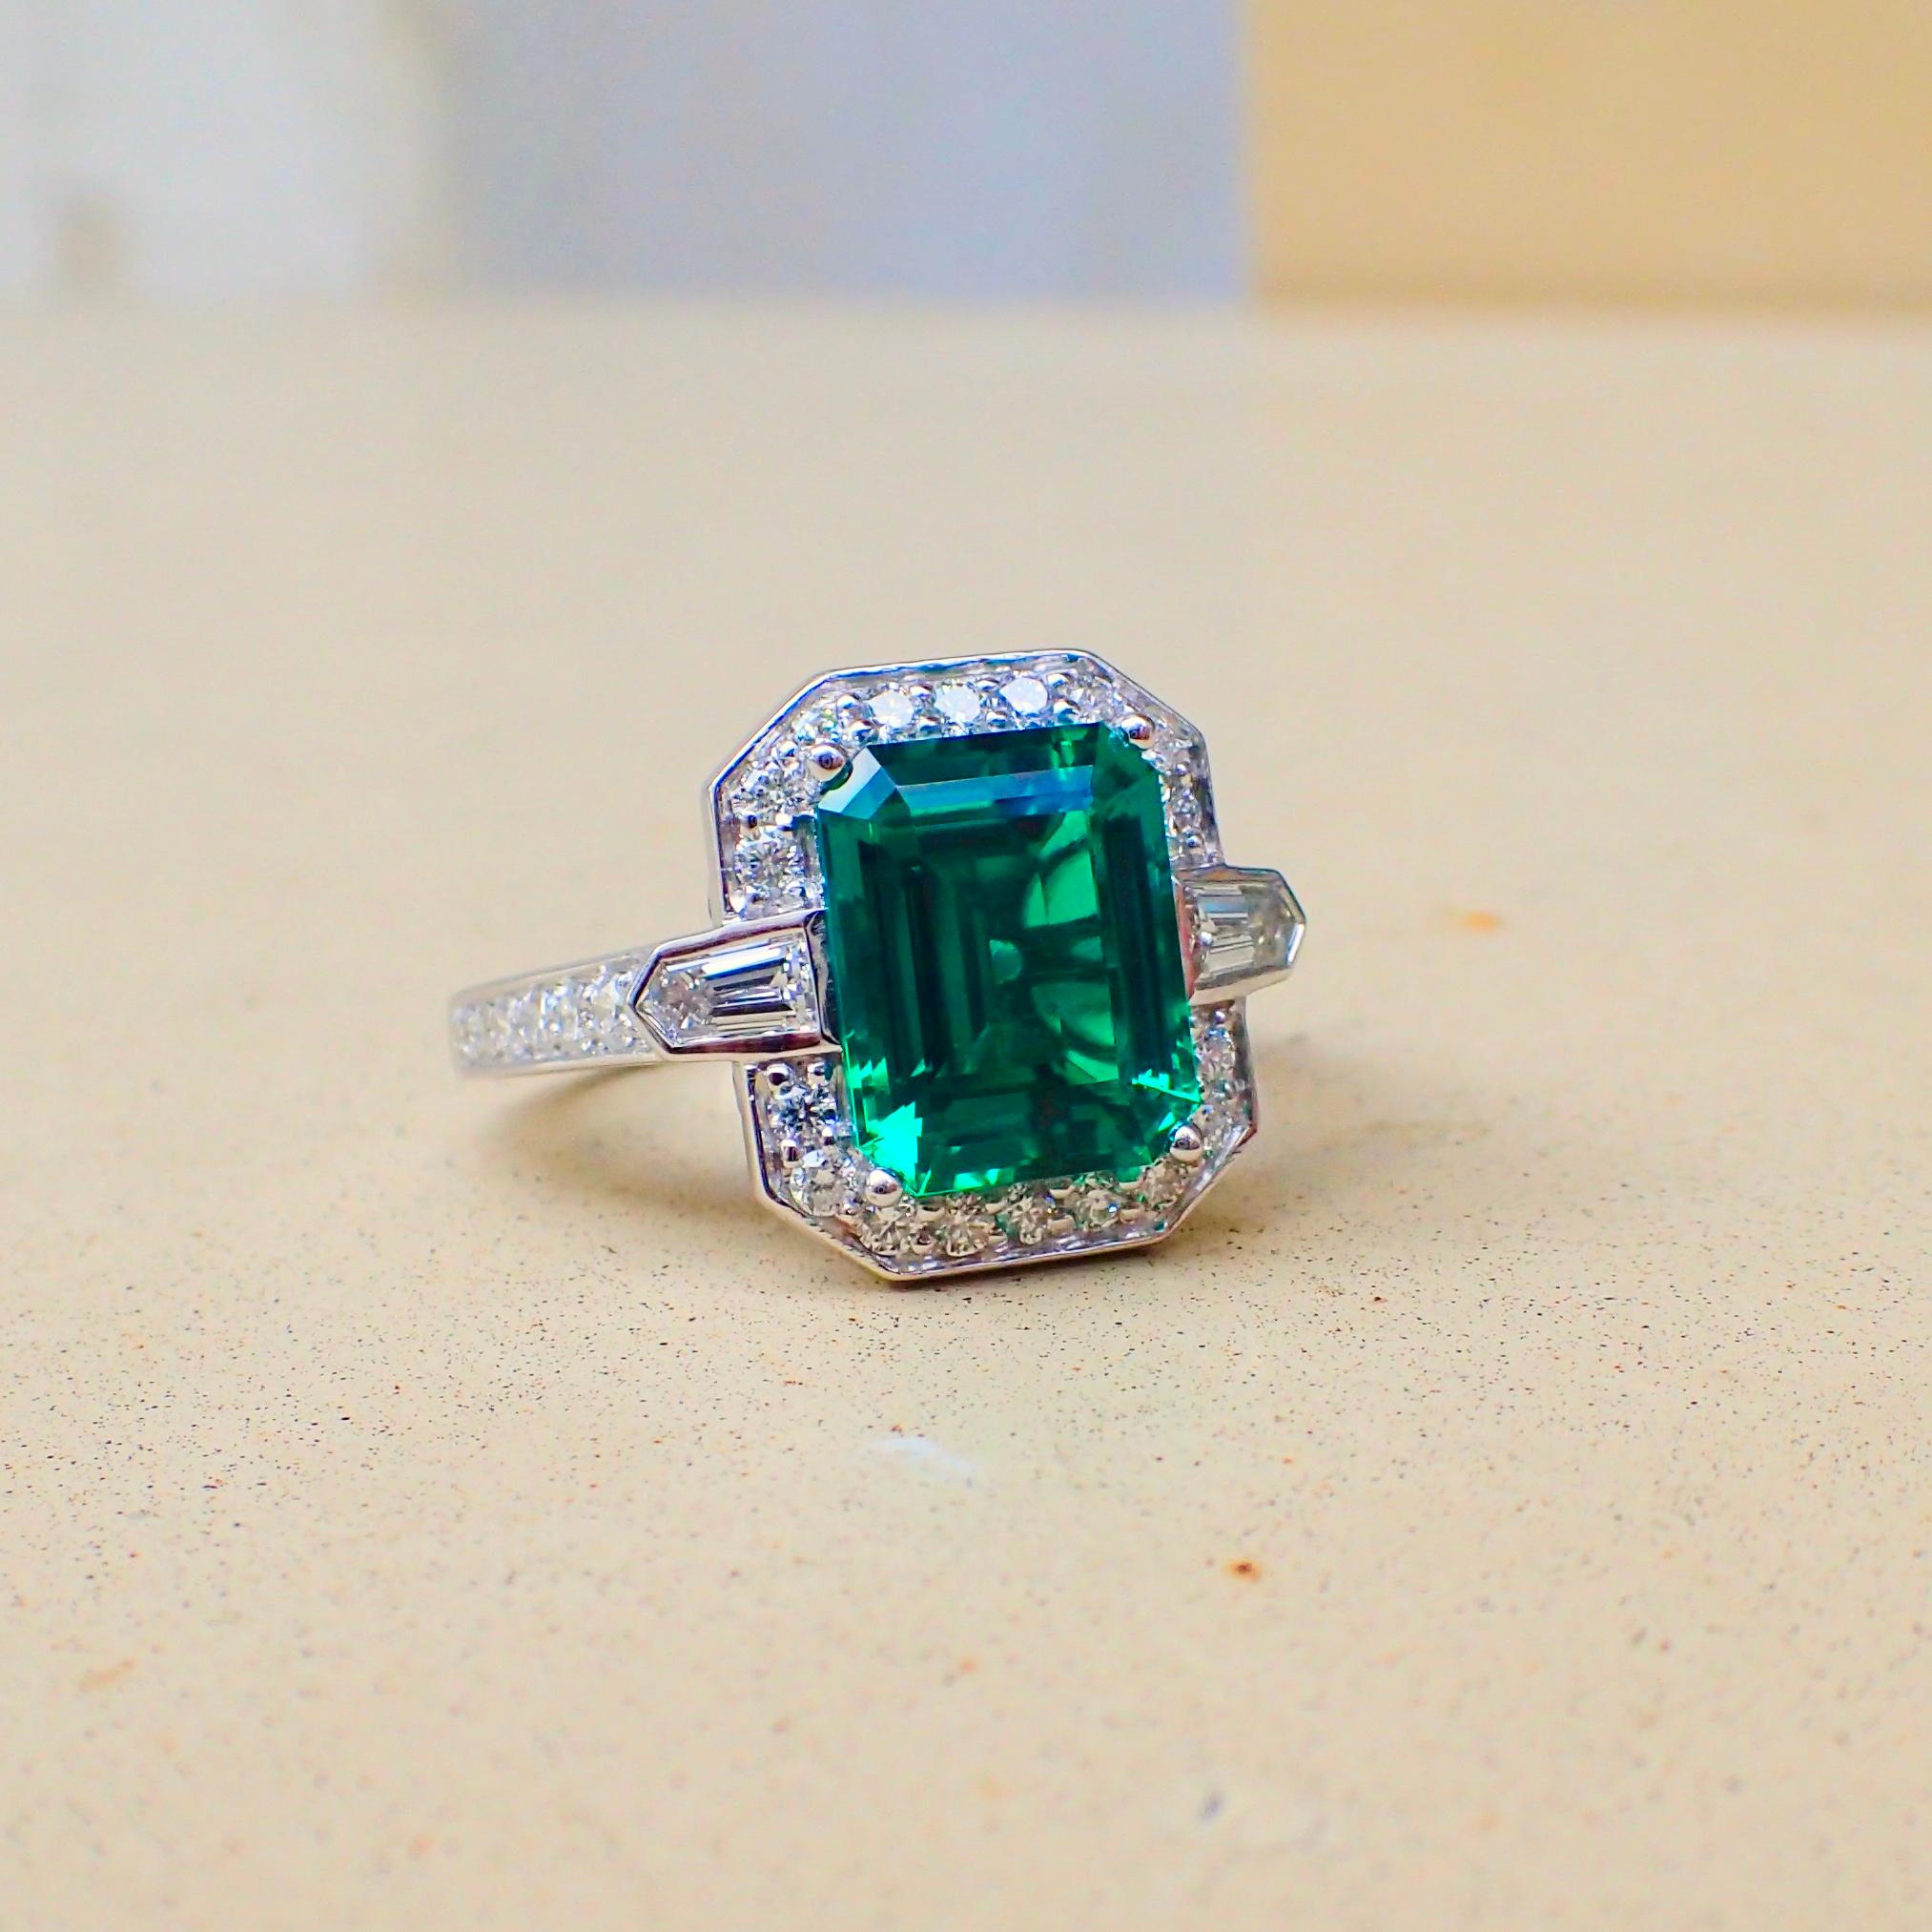 Contemporary 18k White Gold Ring 2.83 carat Chatham-Created Emerald & 0.70 carats of Diamond